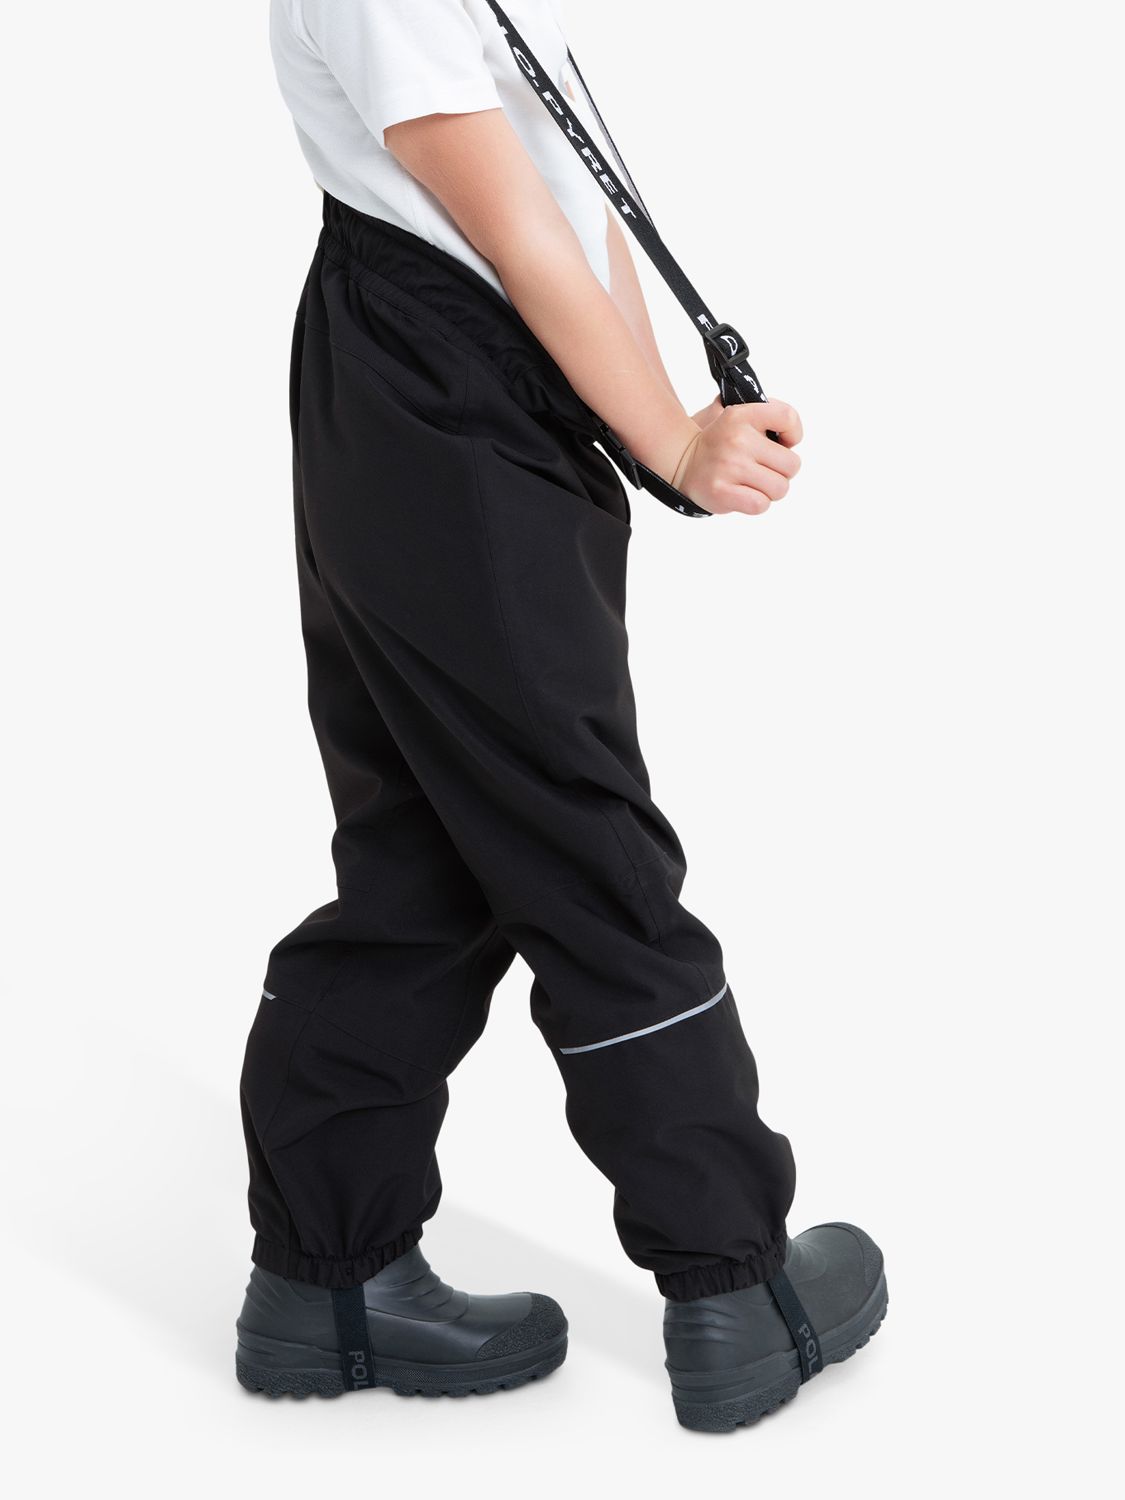 Buy Polarn O. Pyret Kids' Flexi Shell Waterproof Trousers Online at johnlewis.com